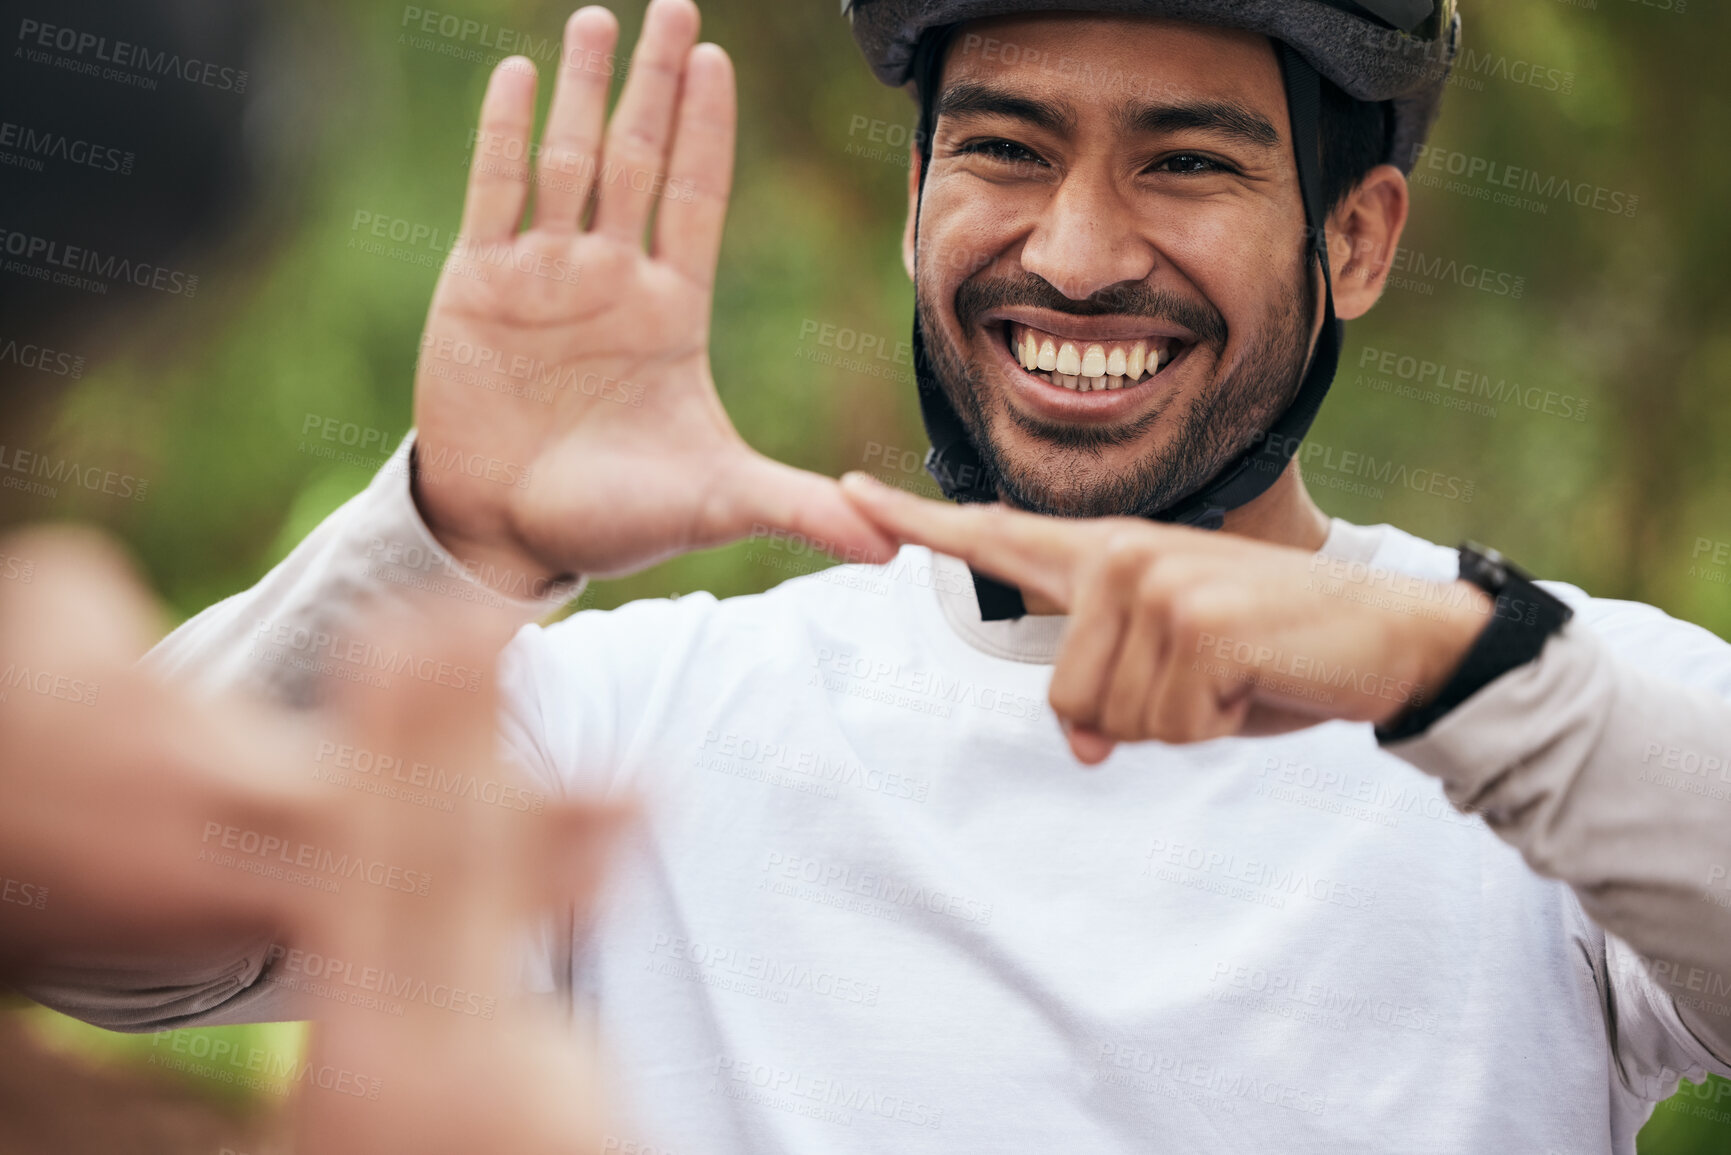 Buy stock photo Cycling, sign language and a man in training outdoor for fitness or communication with a deaf friend. Team building, health and a cyclist talking to a sports person with a disability in nature